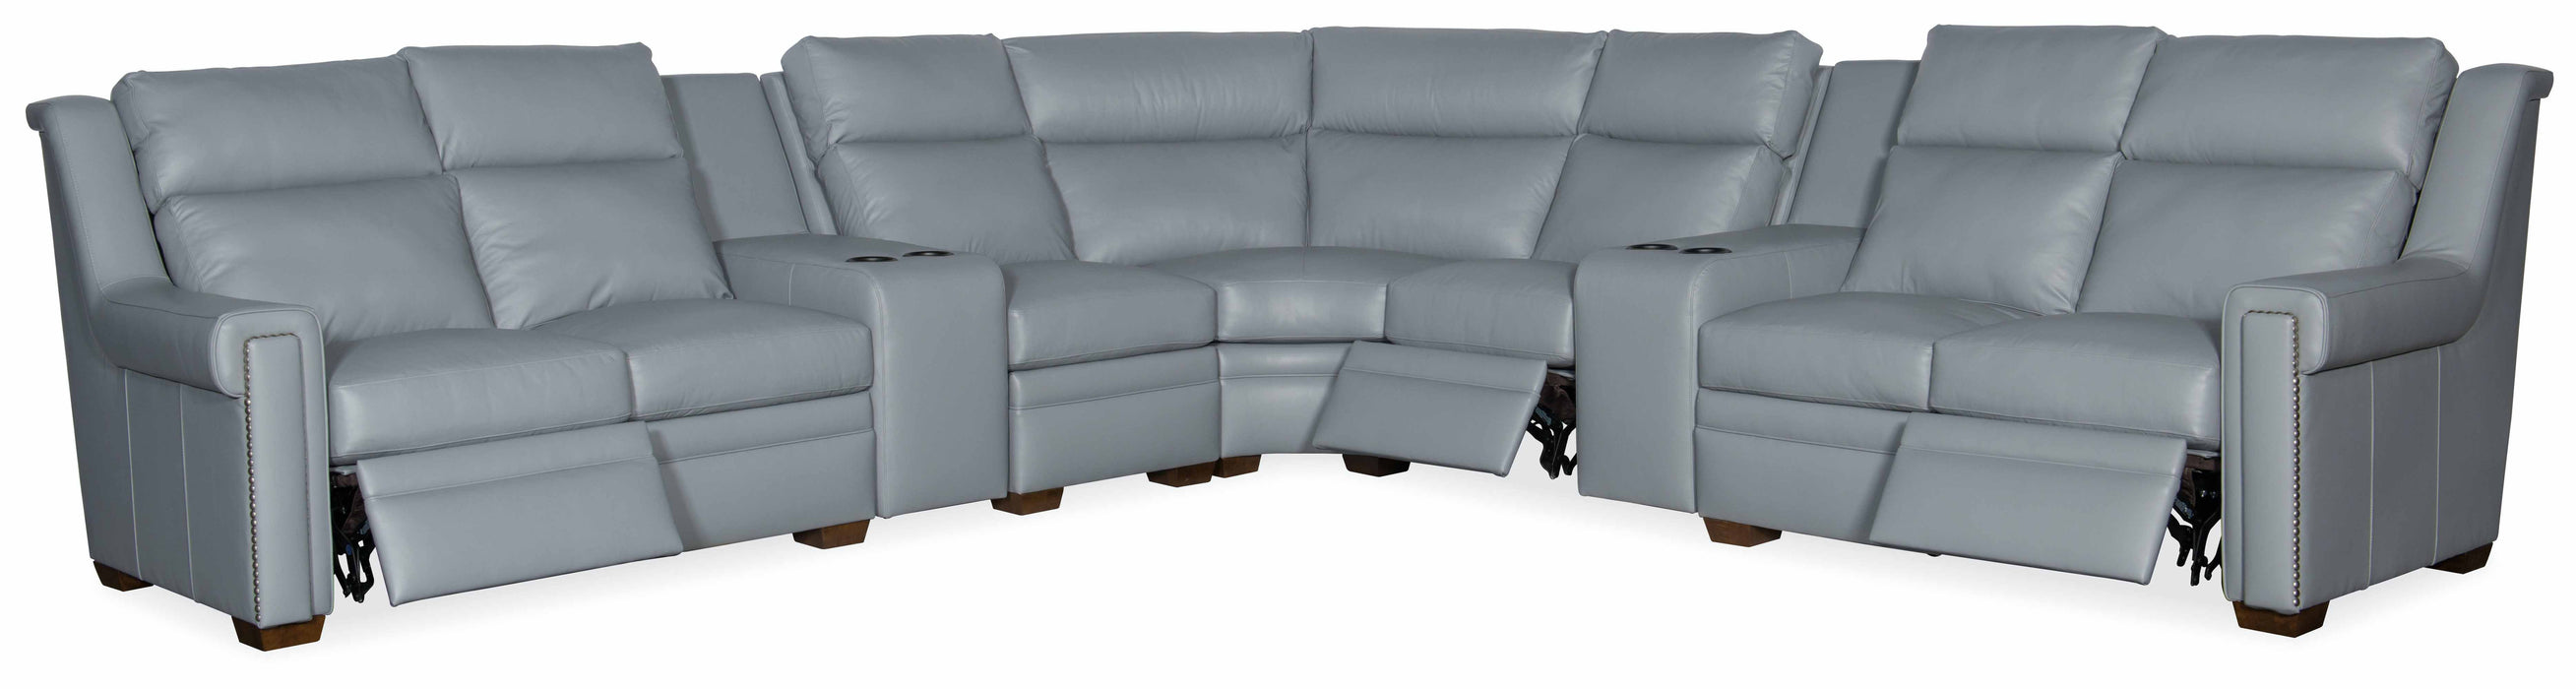 Huntsman Leather Power Reclining Sectional With Articulating Headrest